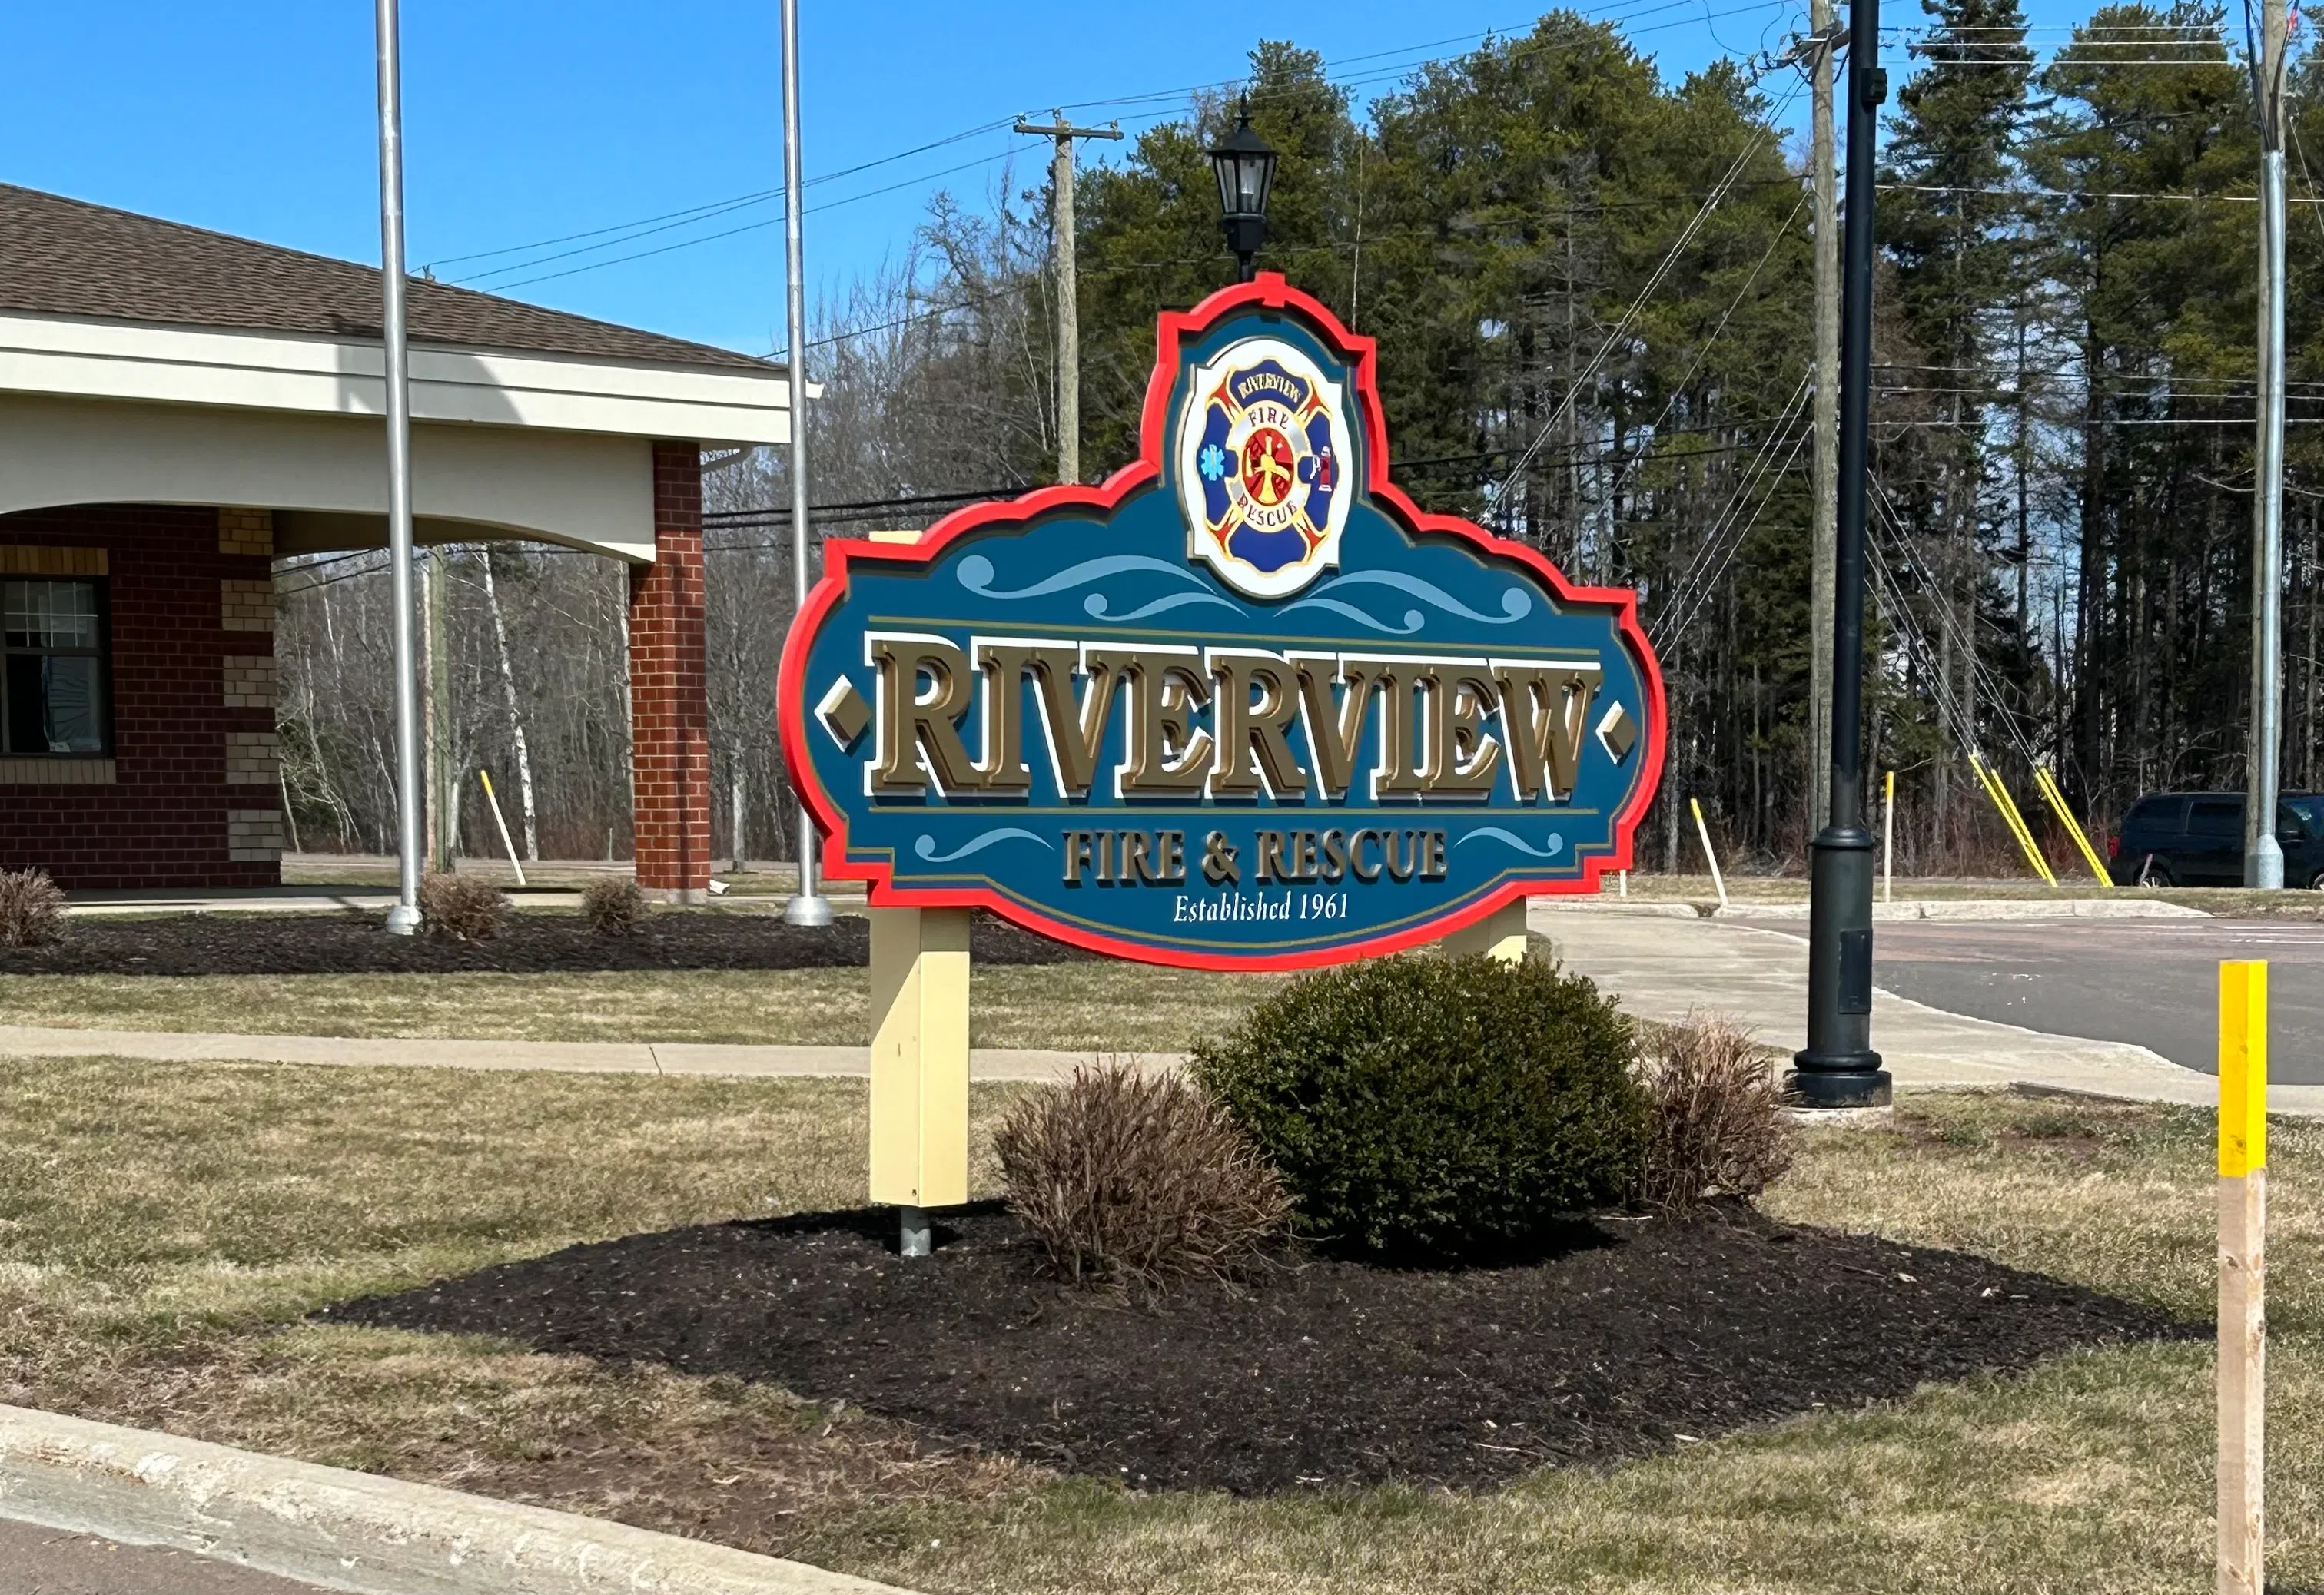 Riverview not immune to wildfires, says Fire and Rescue